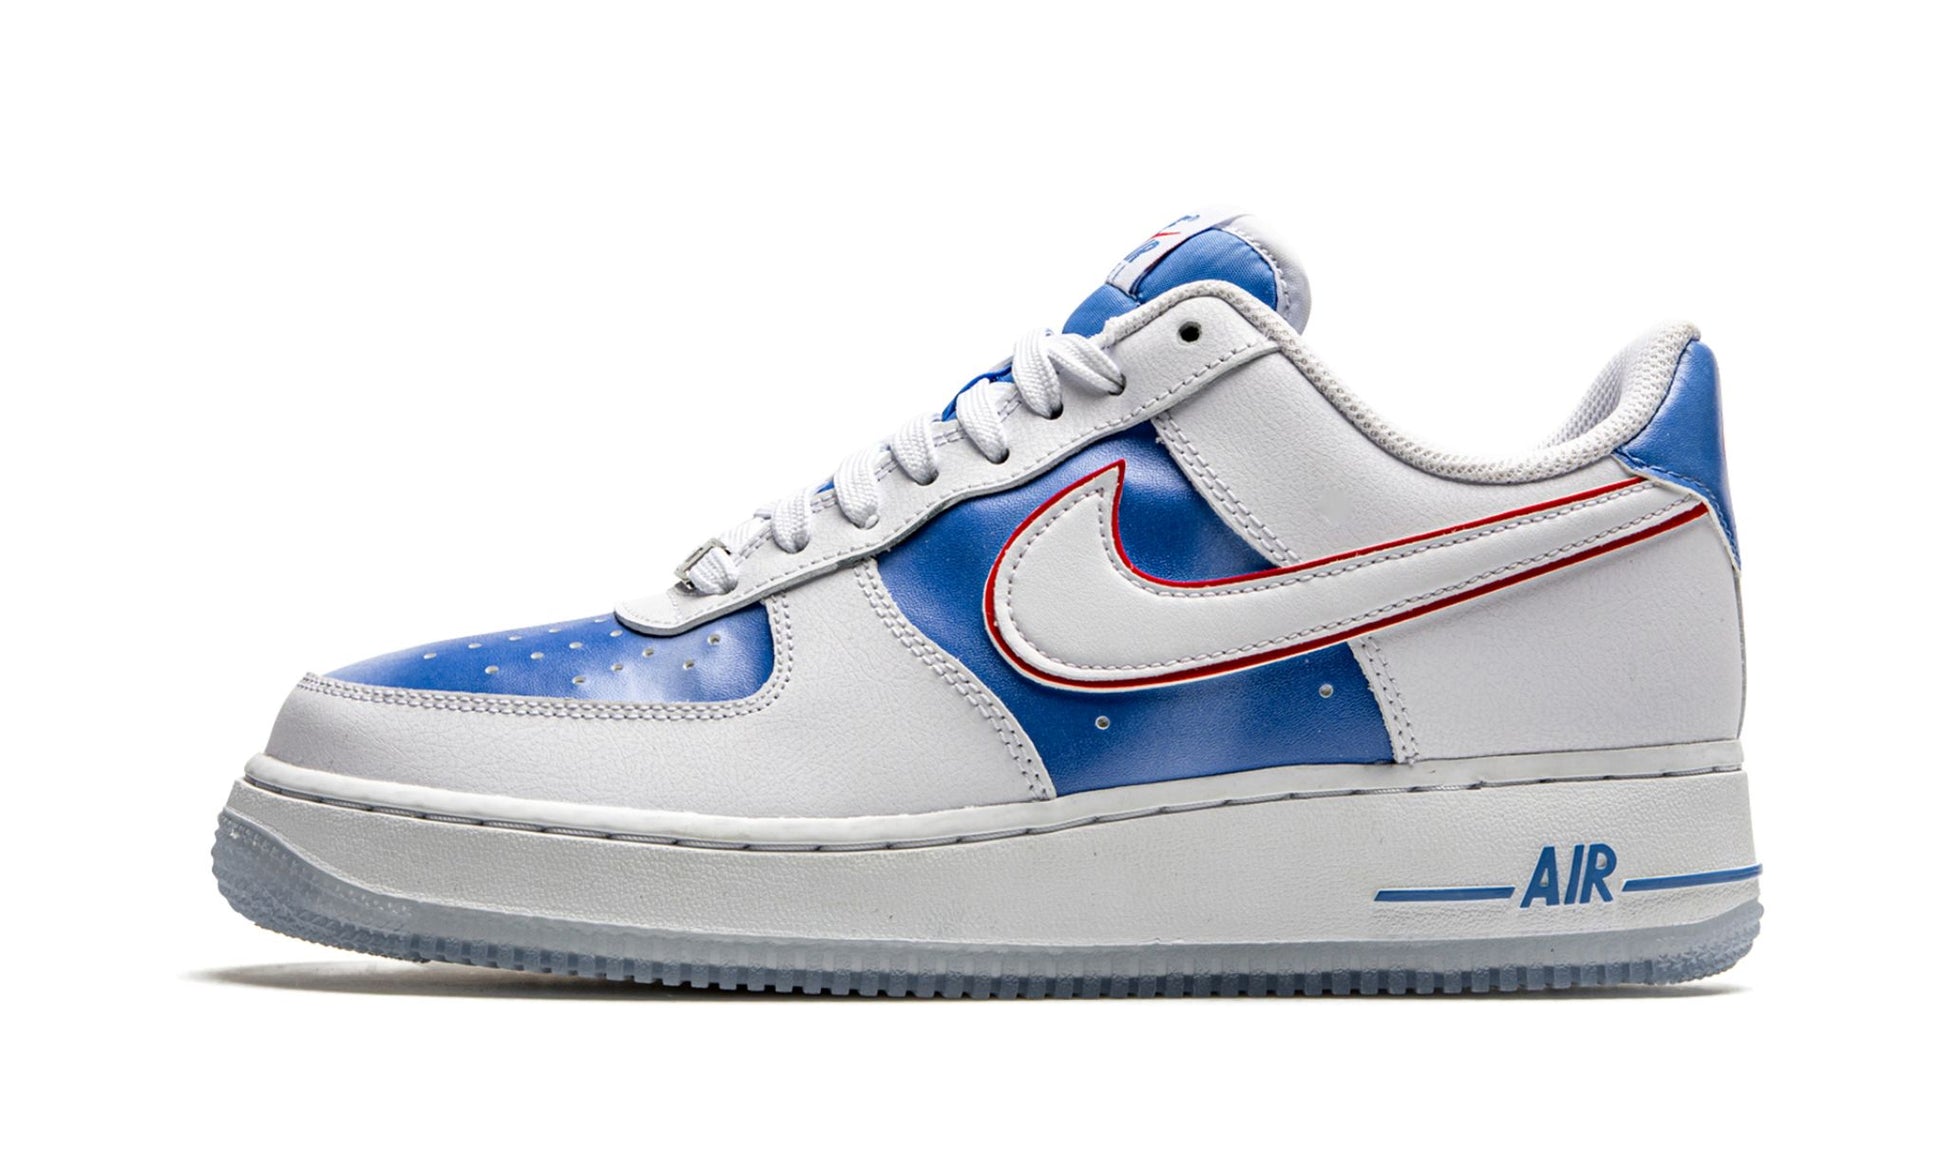 Air Force 1 '07 "Pacific Blue"